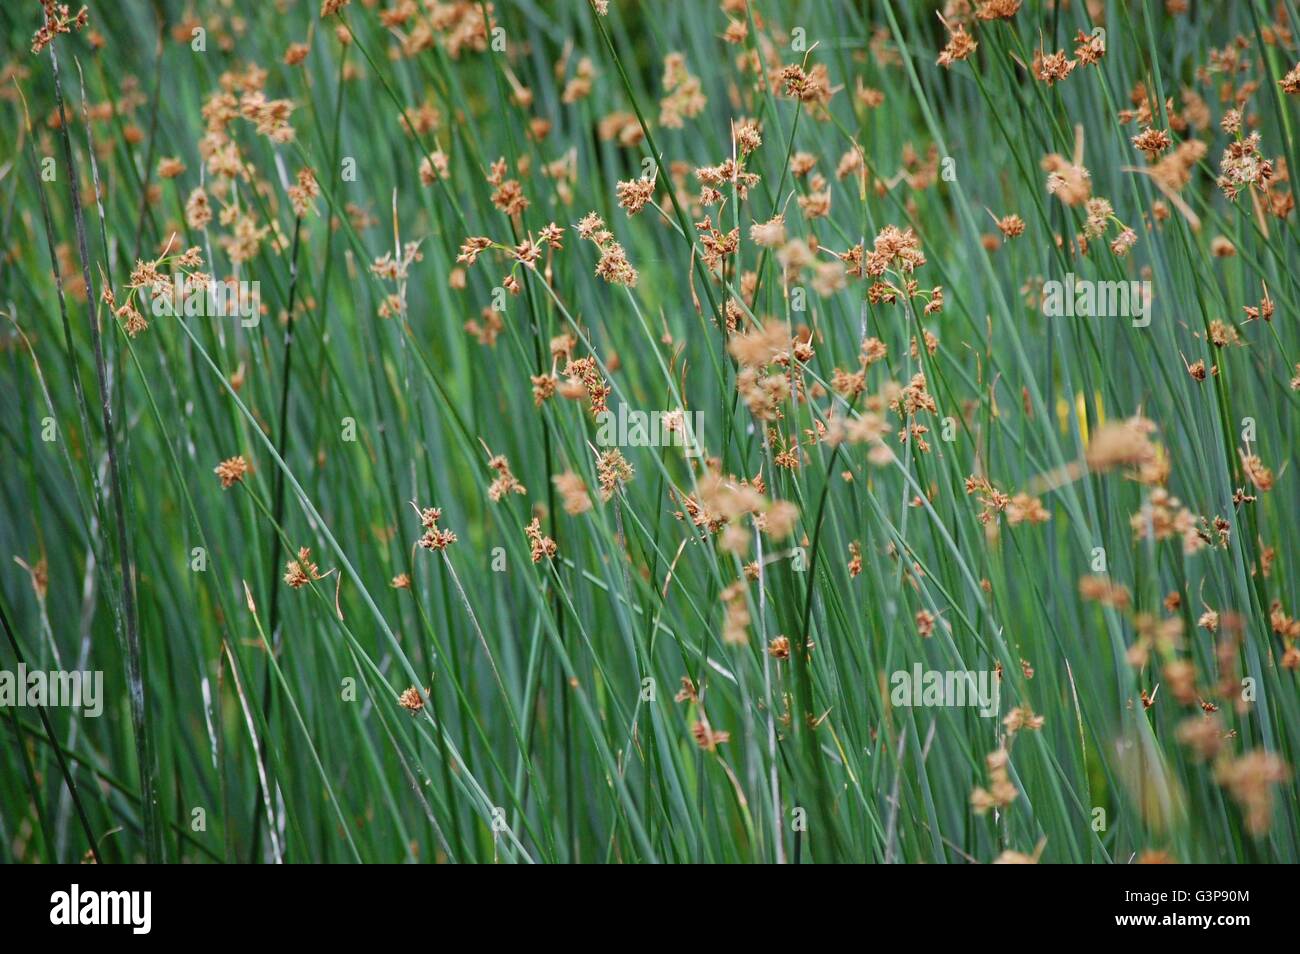 Artistic photo of reeds with golden florets Stock Photo